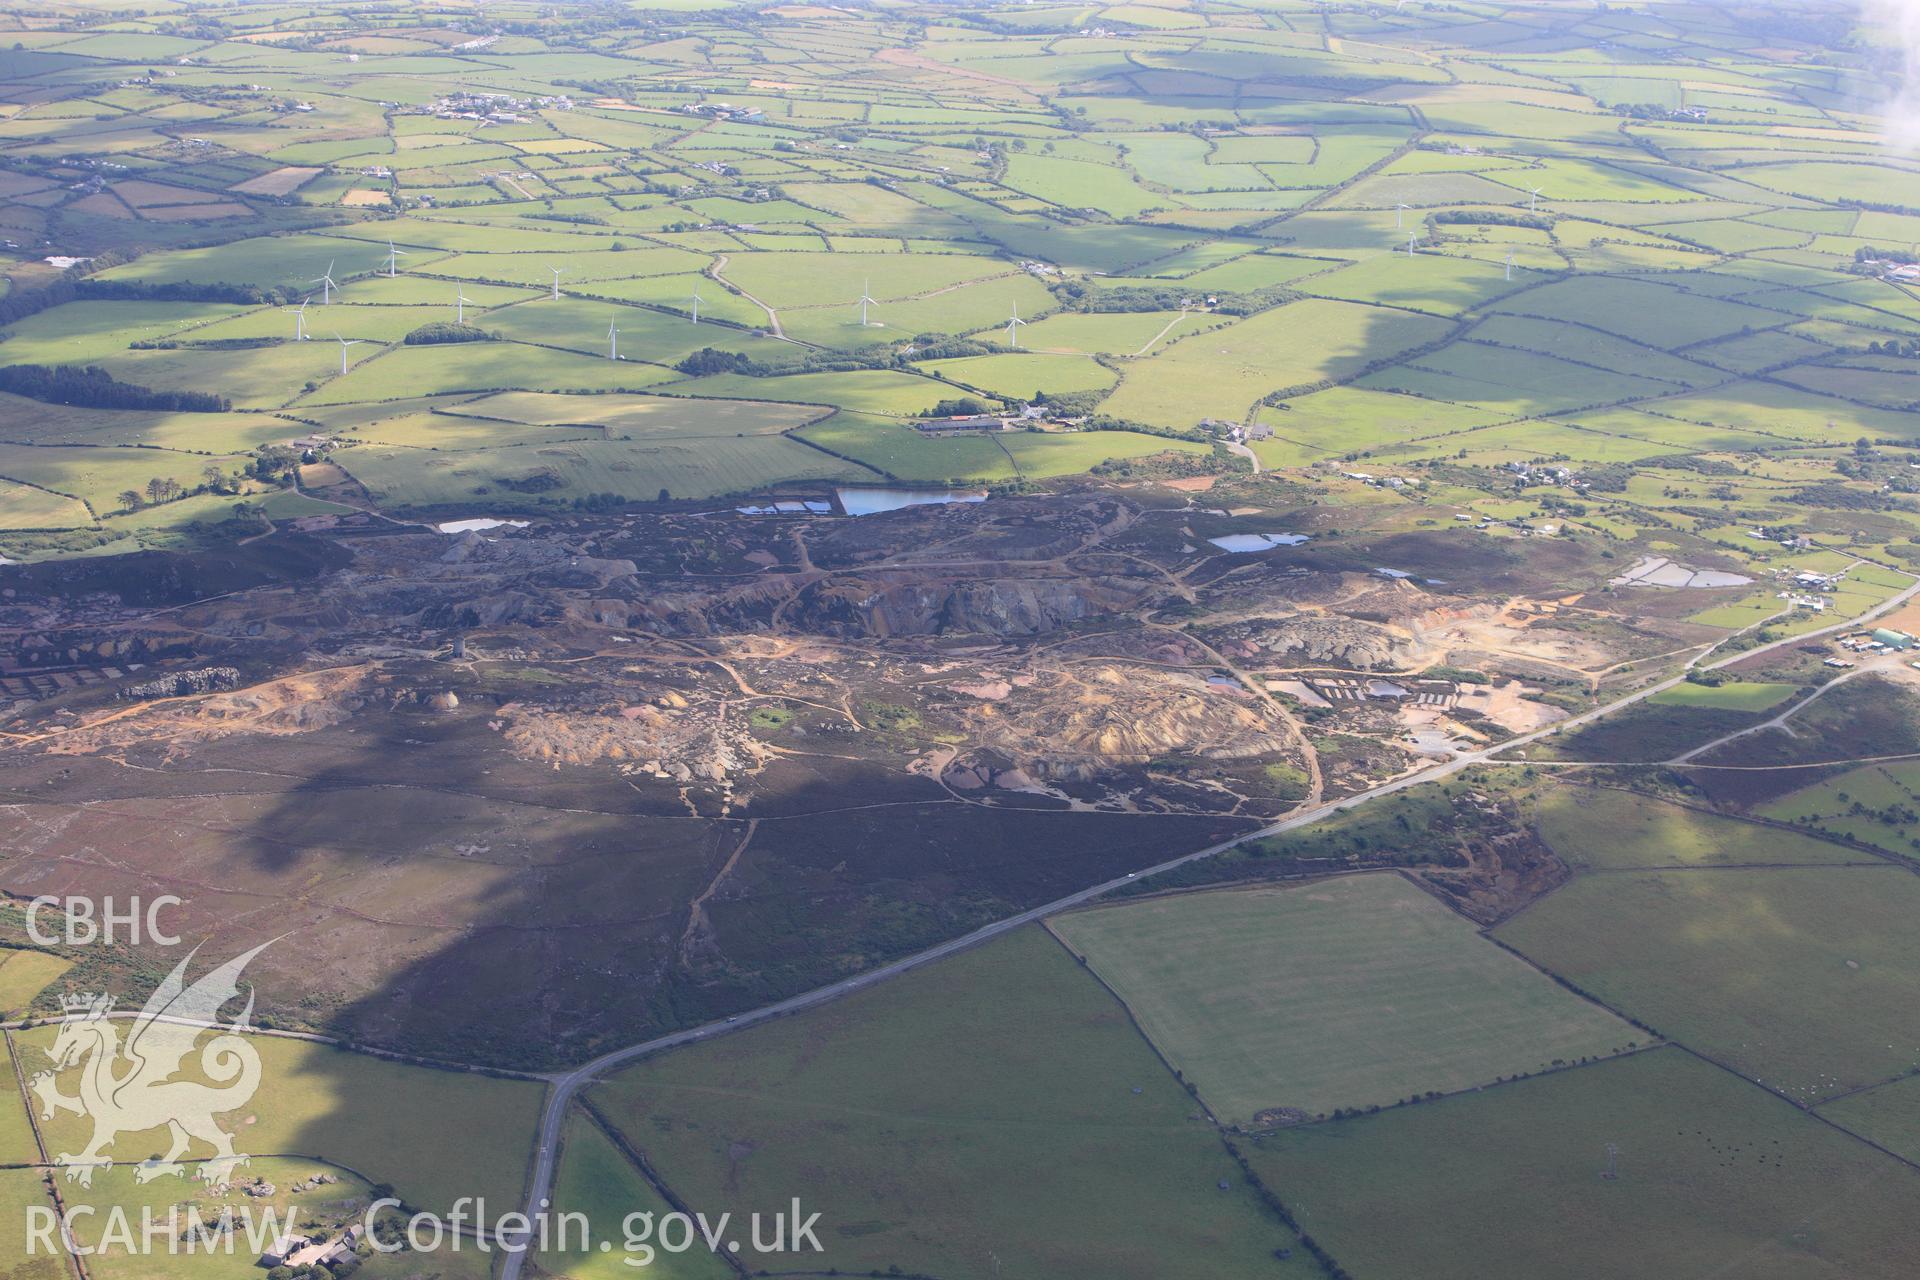 RCAHMW colour oblique photograph of Parys Mountain Copper Mines, Amlwch, view from north. Taken by Toby Driver on 20/07/2011.